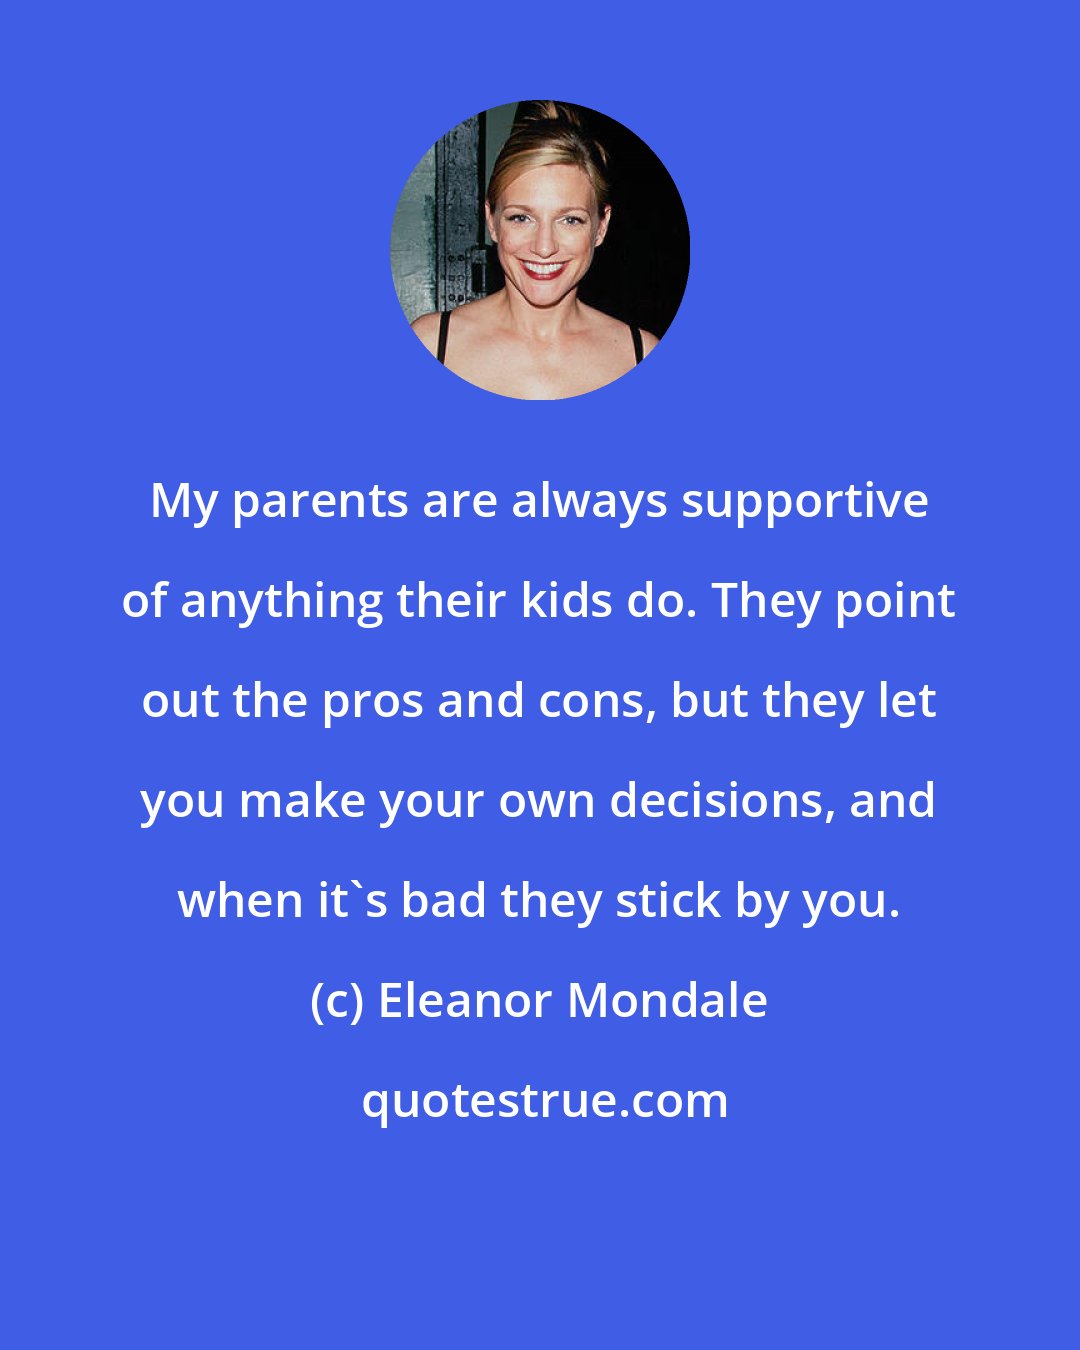 Eleanor Mondale: My parents are always supportive of anything their kids do. They point out the pros and cons, but they let you make your own decisions, and when it's bad they stick by you.